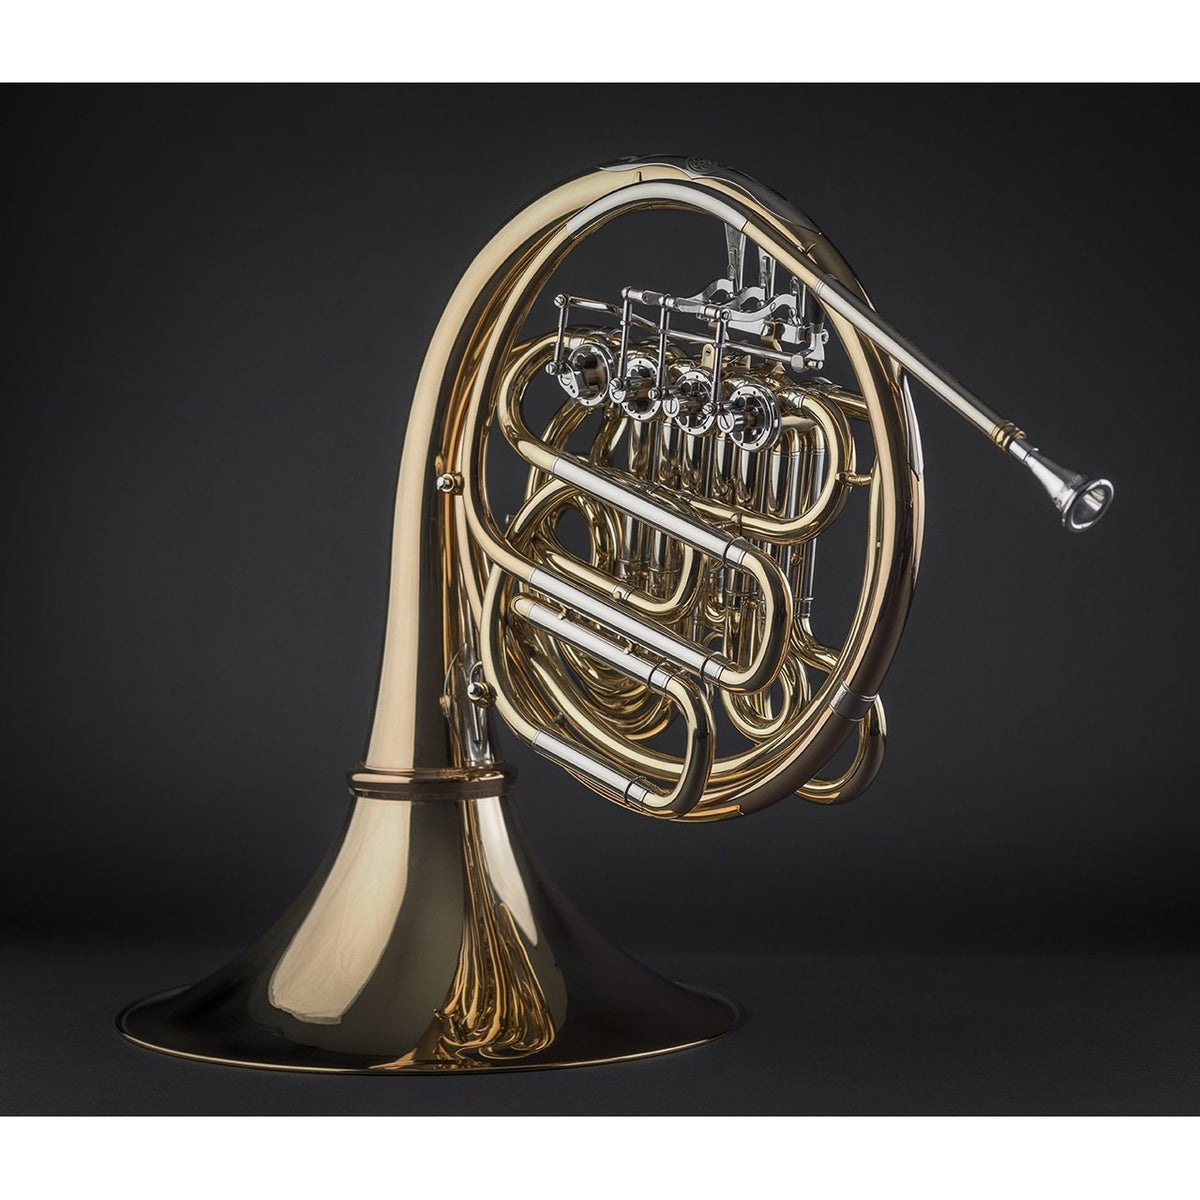 Stomvi - TitÃ¡n SEIS Bb/F Double Gold Brass French Horns (Geyer System)-French Horn-Stomvi-Music Elements